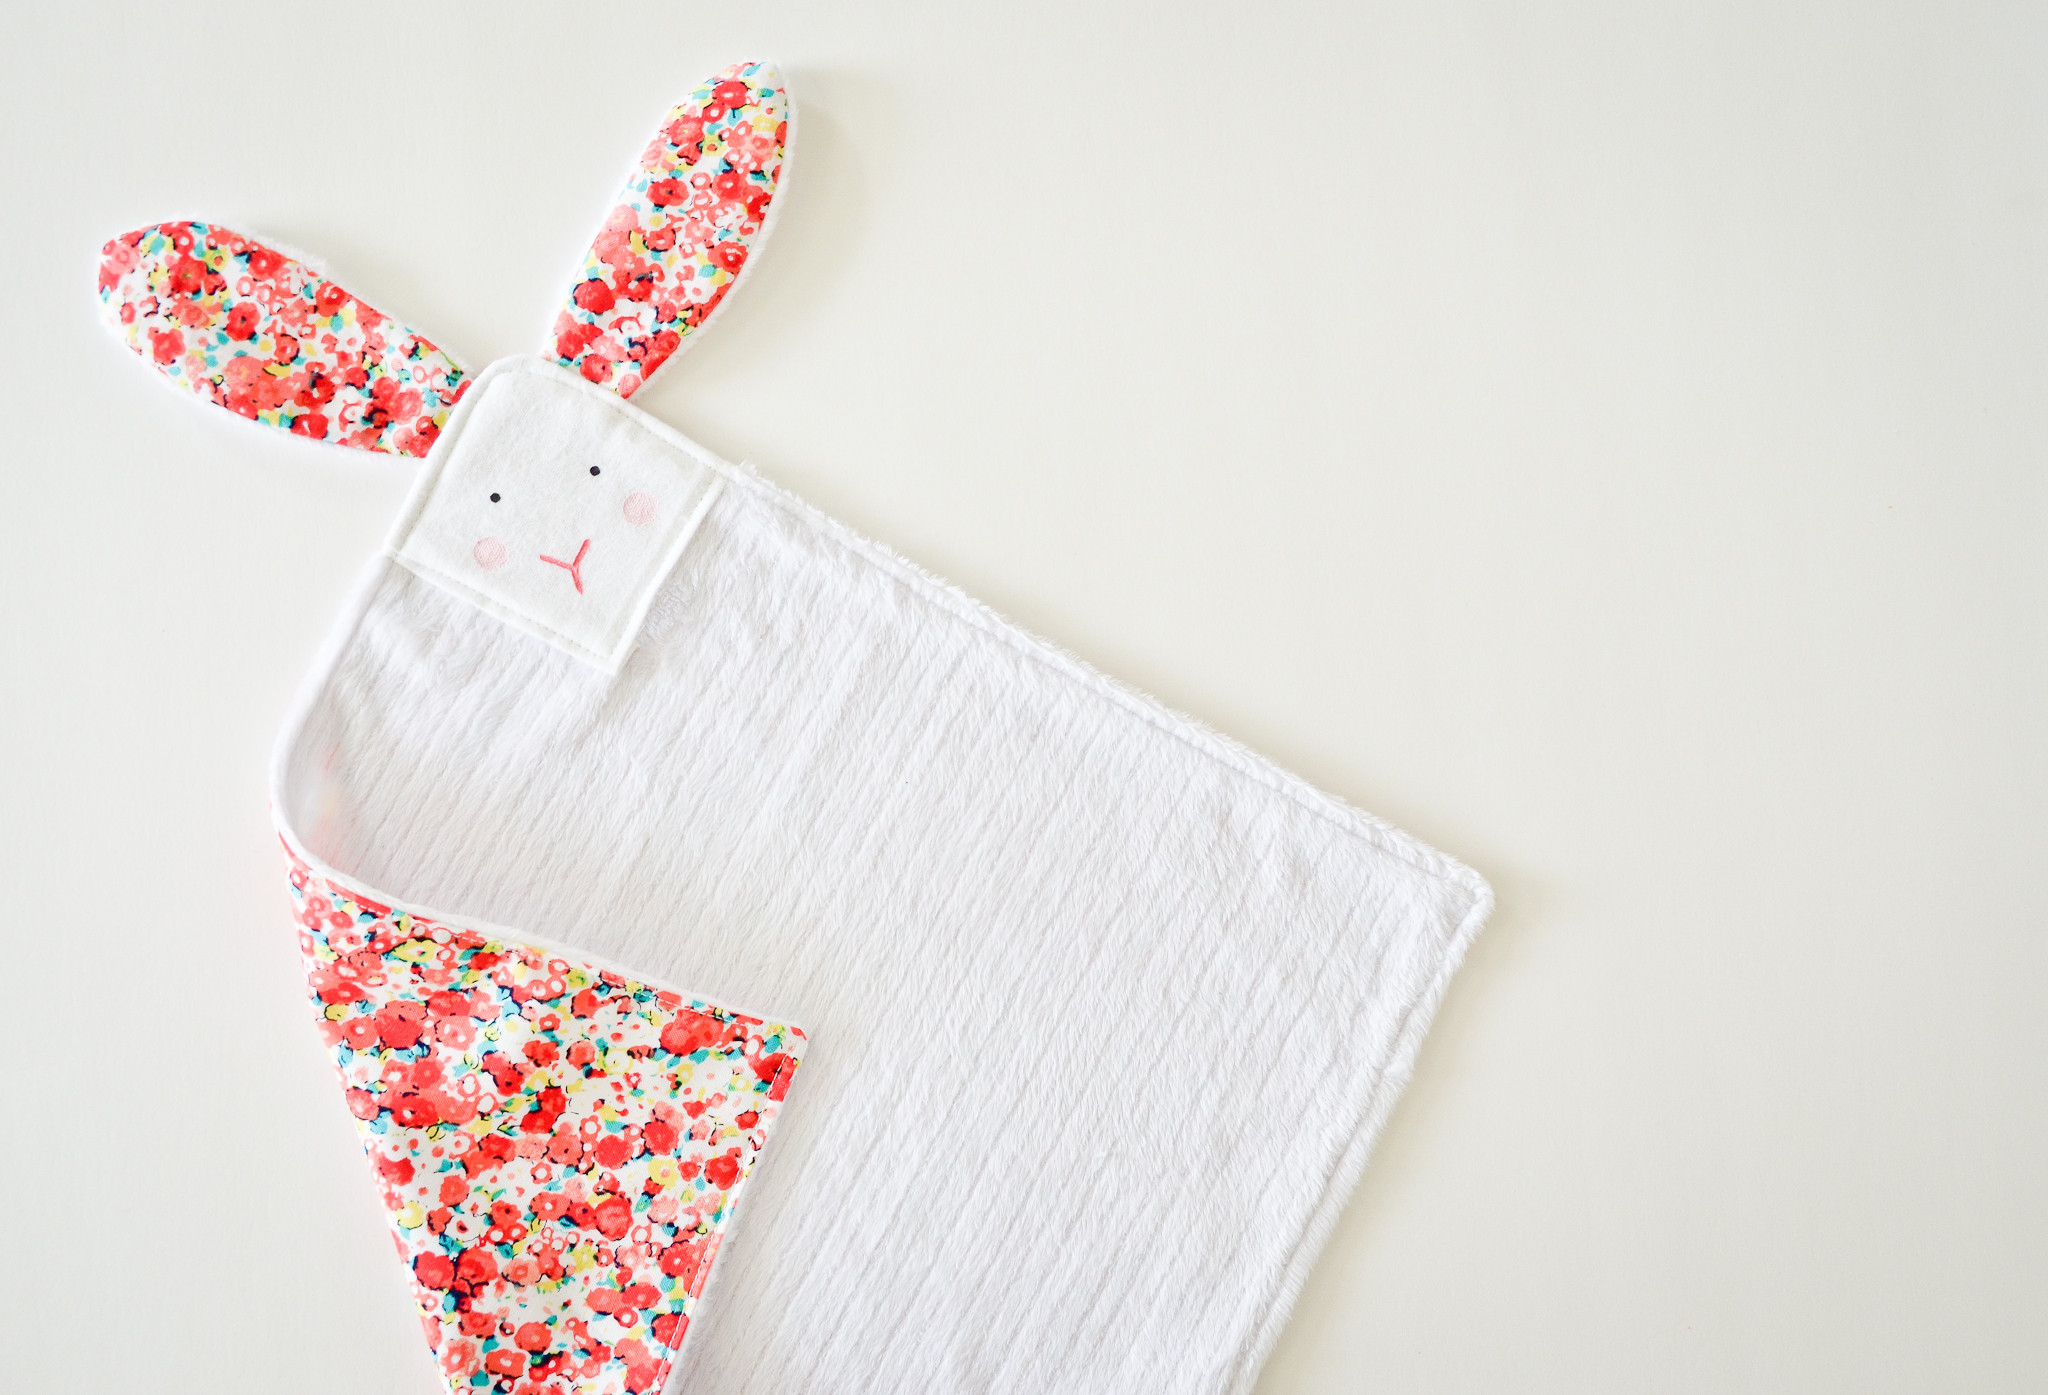 DIY Baby Blanket Ideas
 Our DIY Bunny Lovey Makes the Perfect Handmade Gift